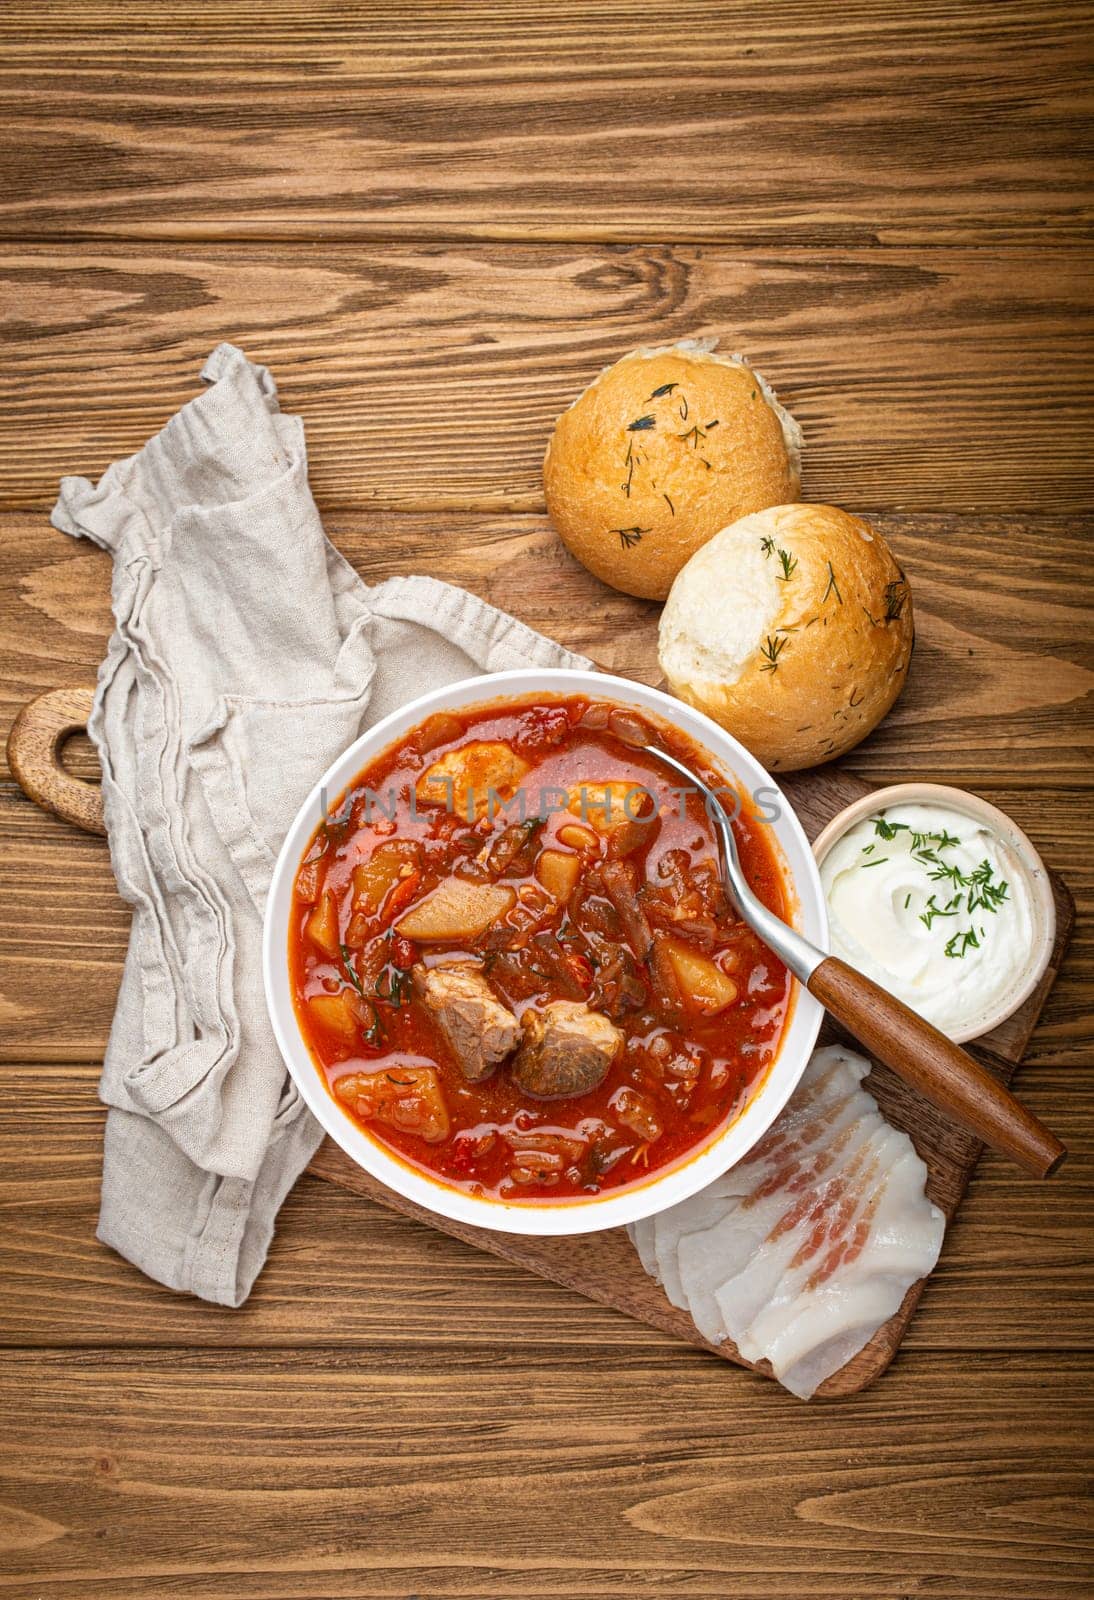 Ukrainian Borscht, red beetroot soup with meat, in white bowl with sour cream, garlic buns Pampushka and salo slices, rustic stone background. Traditional authentic dish of Ukraine by its_al_dente